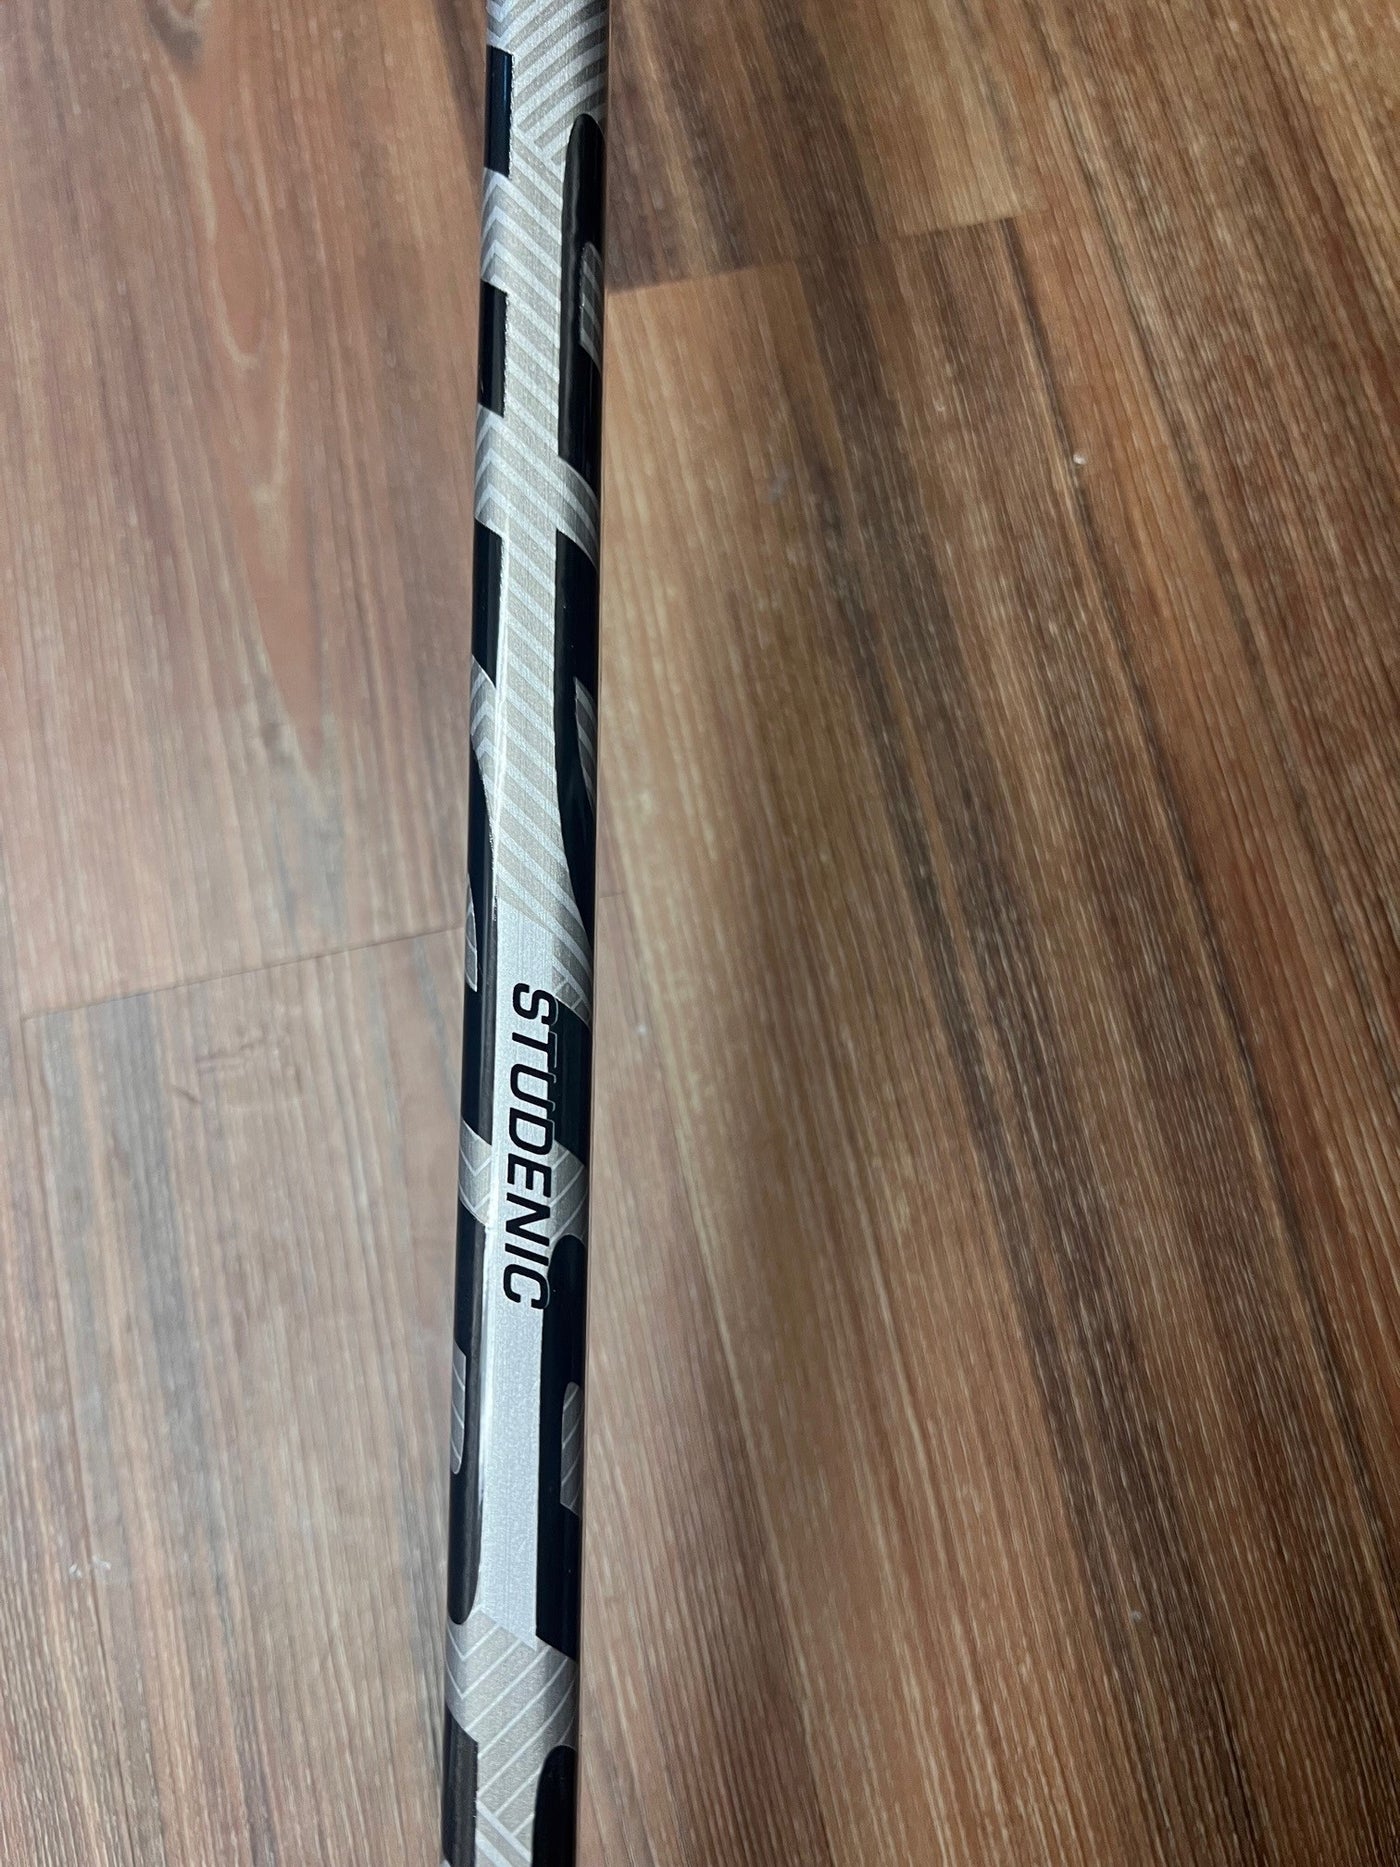 STUDENIC NEW WARRIOR TEAM ISSUED STICK - View of name on stick